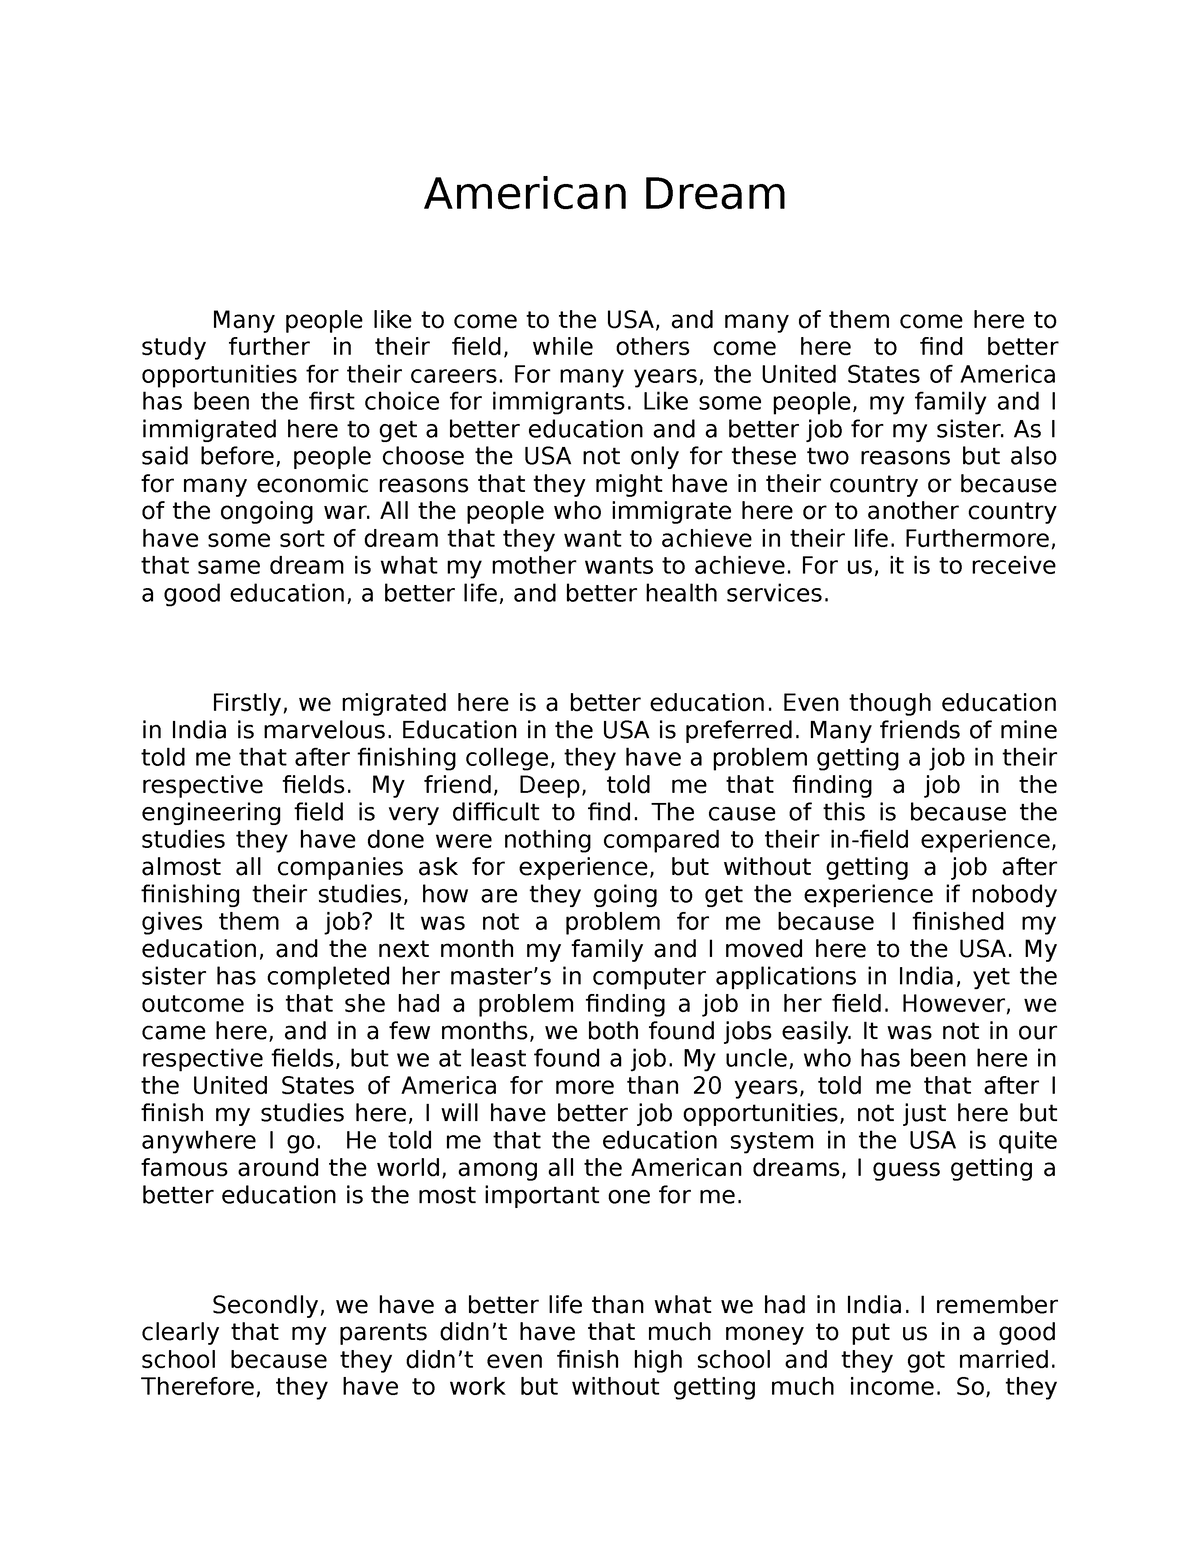 hook for the american dream essay